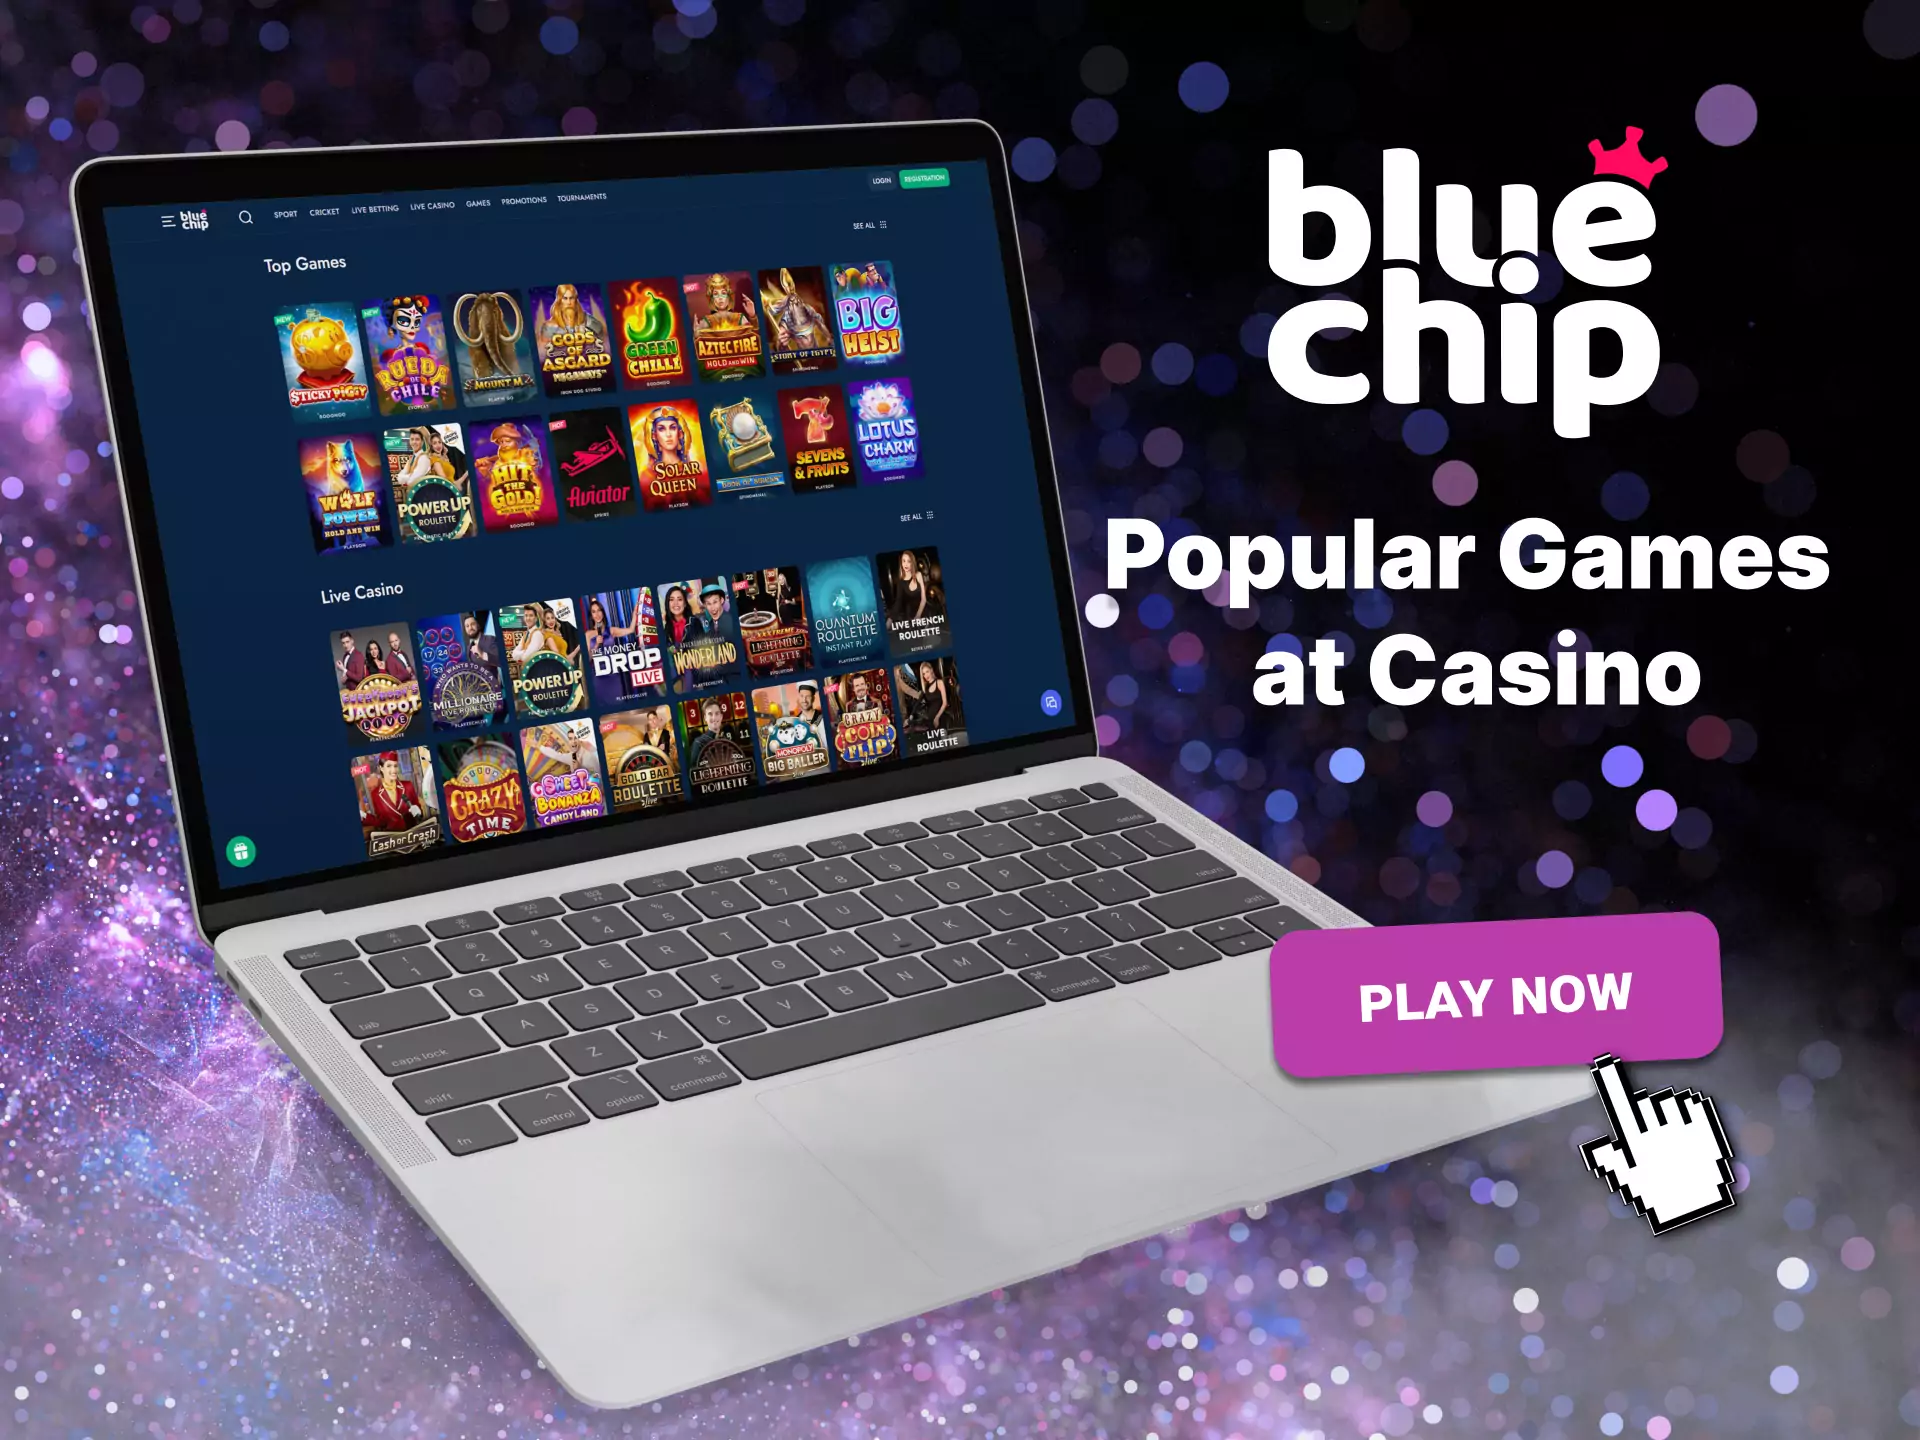 Try the popular casino games in Bluechip, find your favorite.